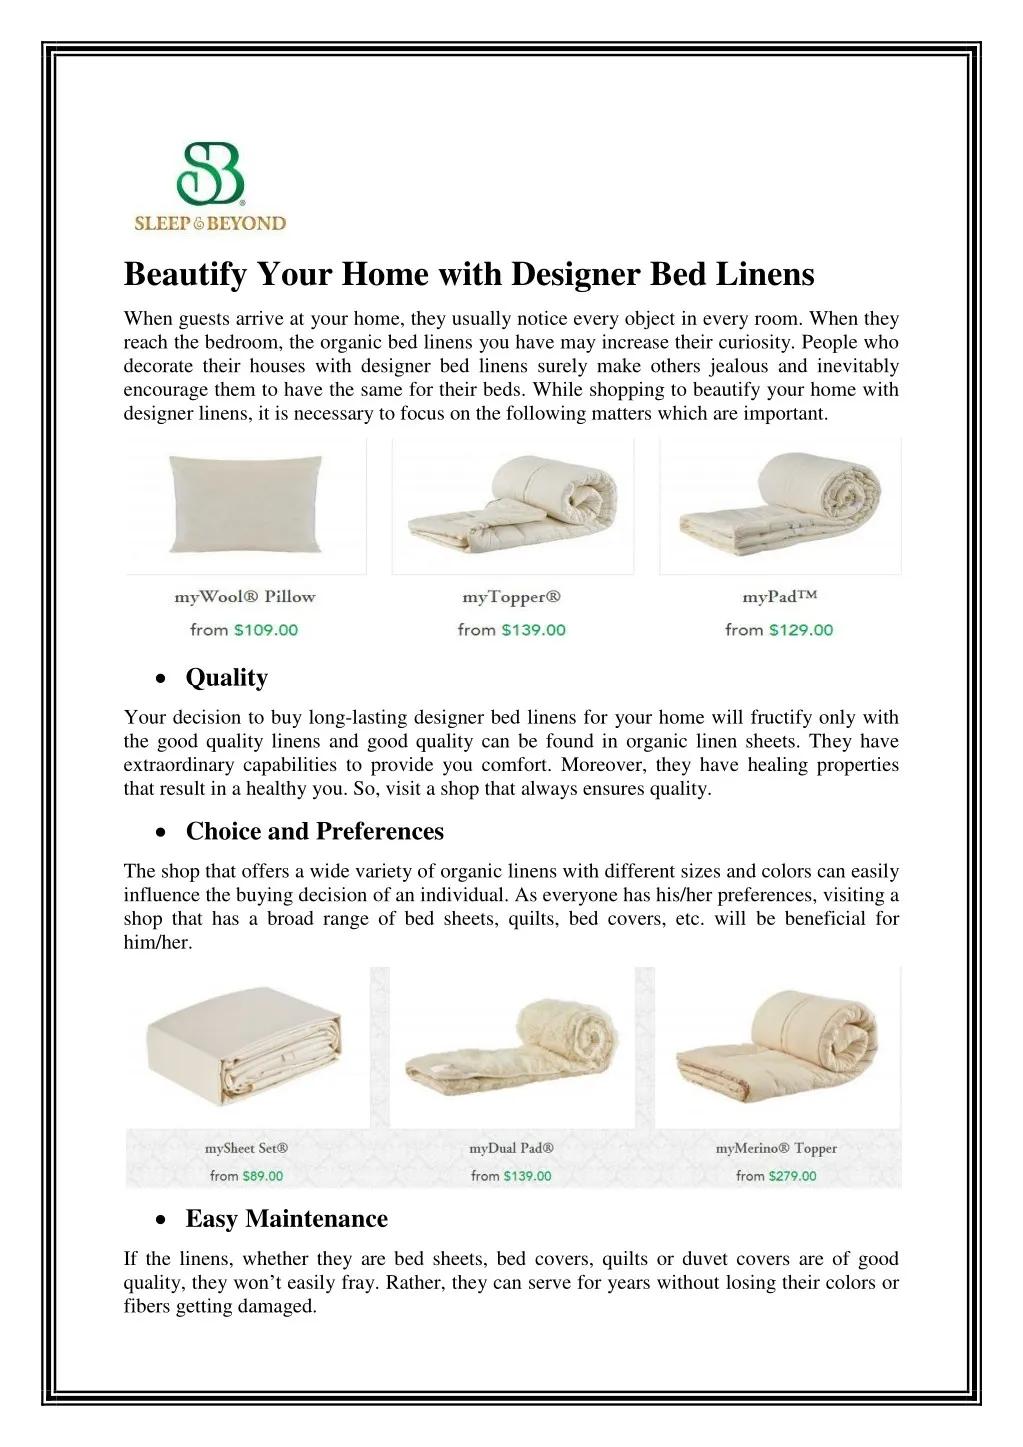 beautify your home with designer bed linens